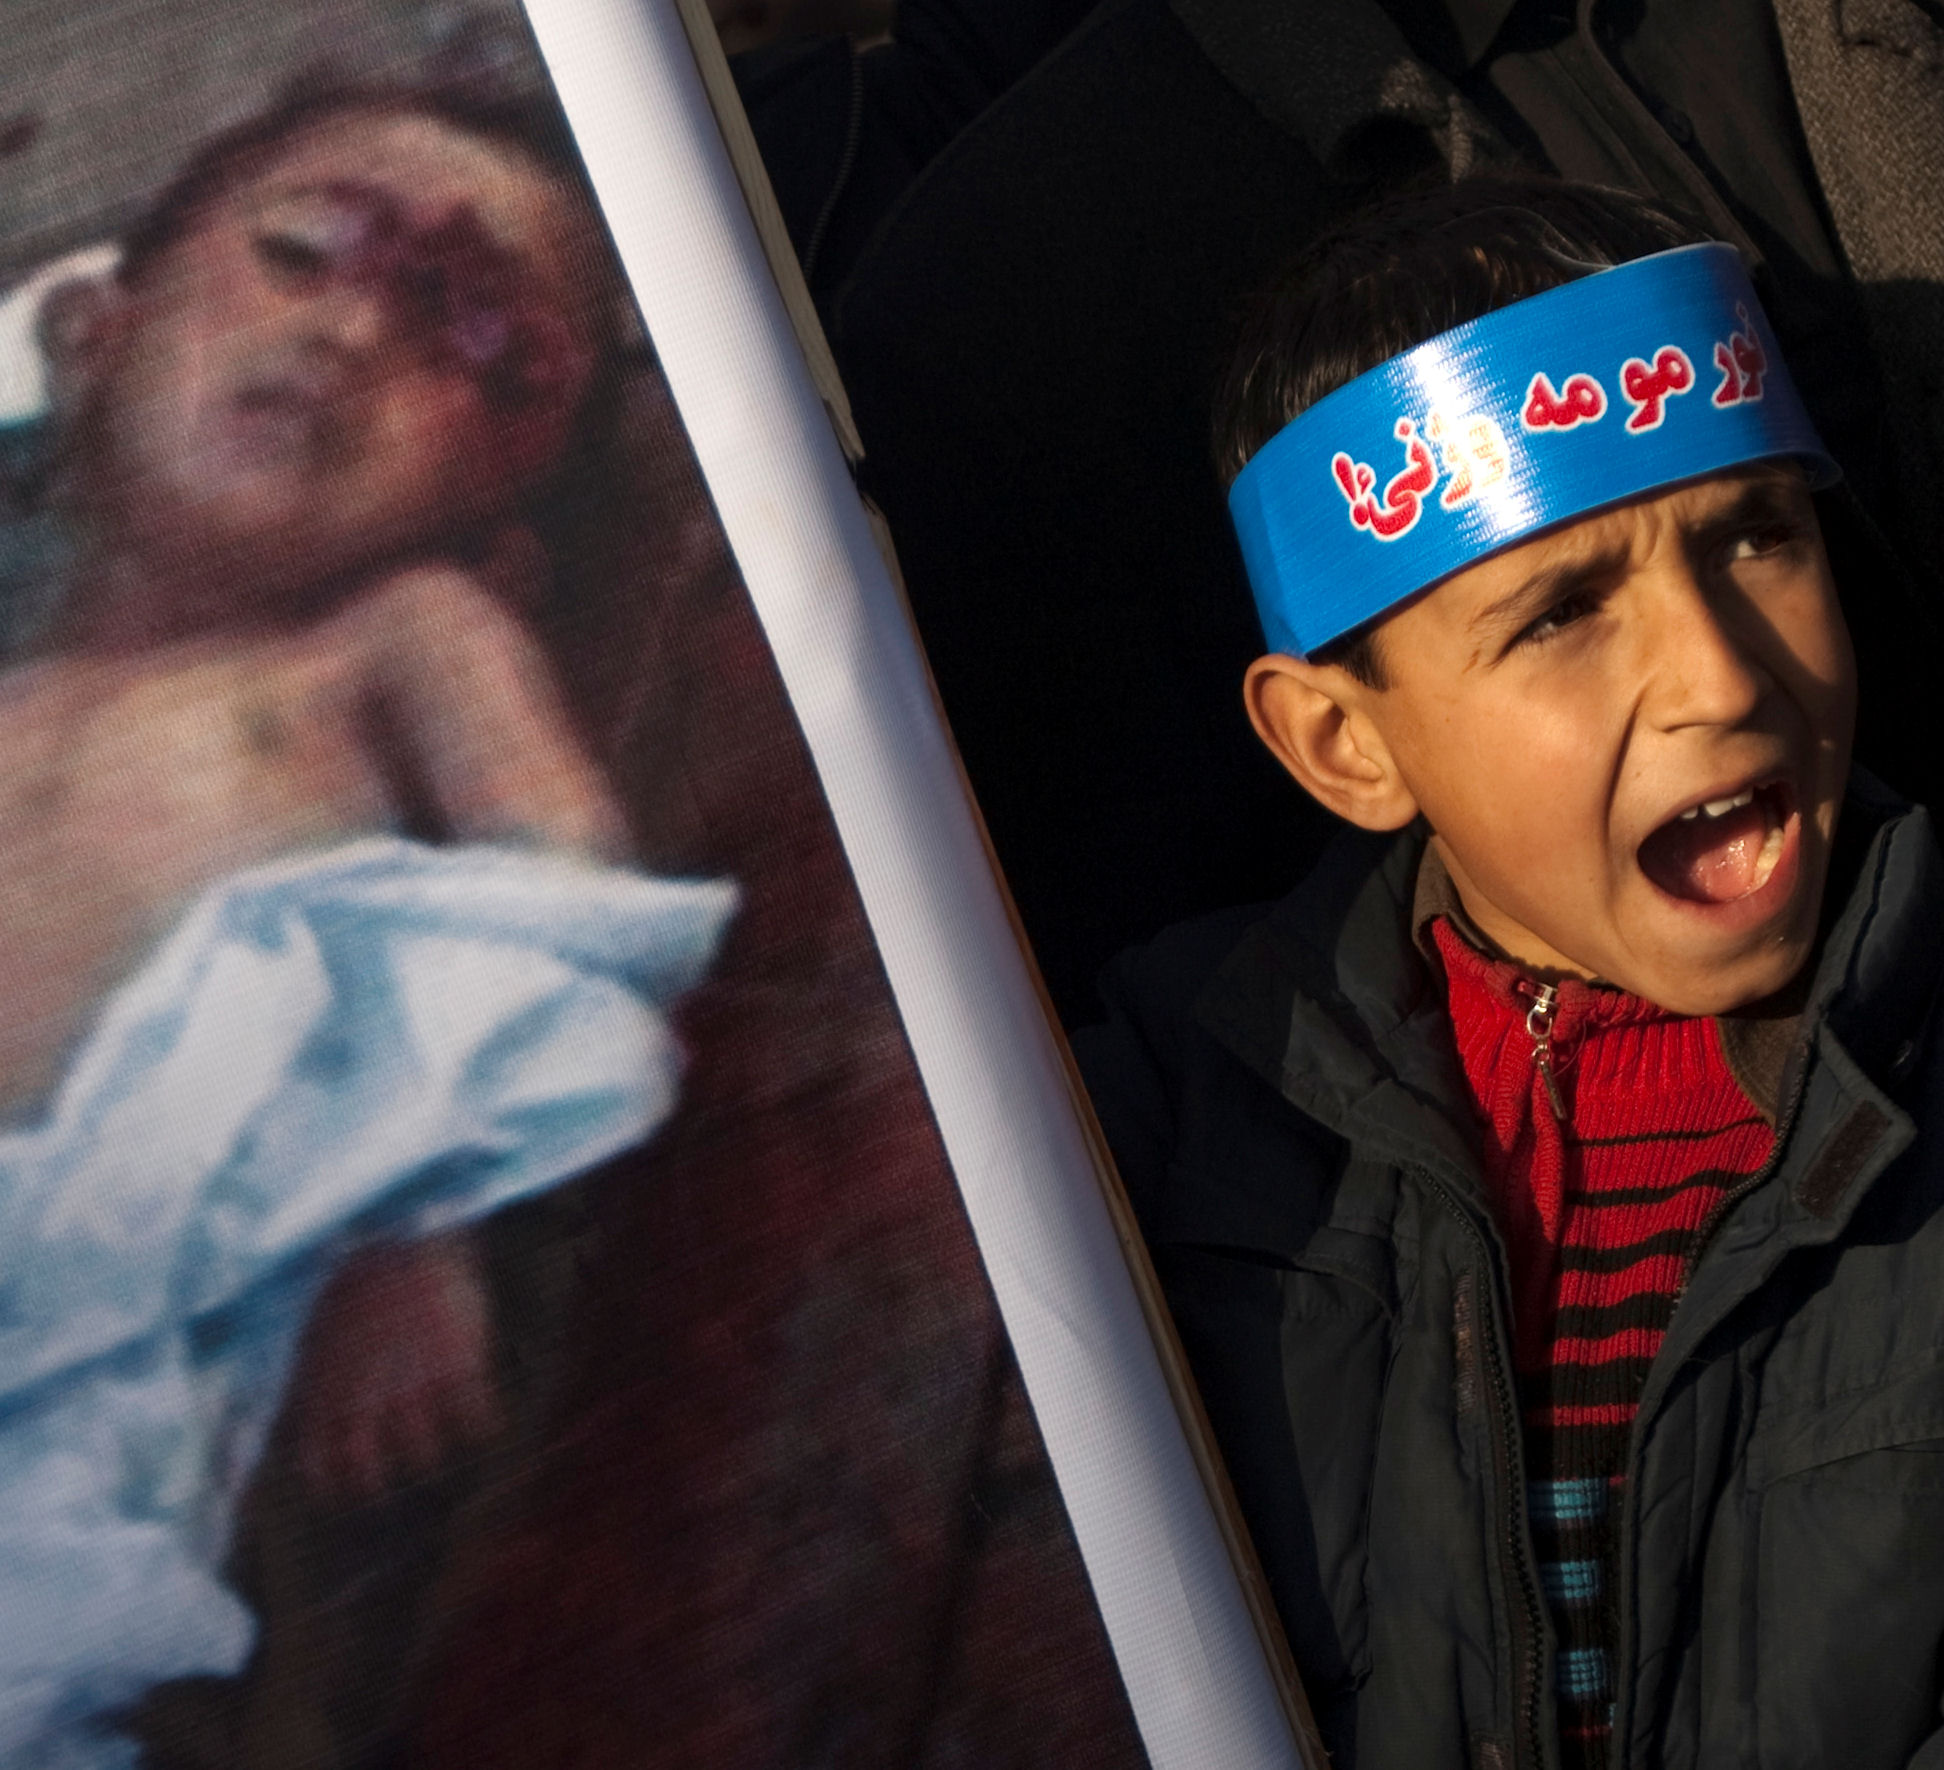 Afghan child protest killing of civilians in airstrike (credit - Reuters)